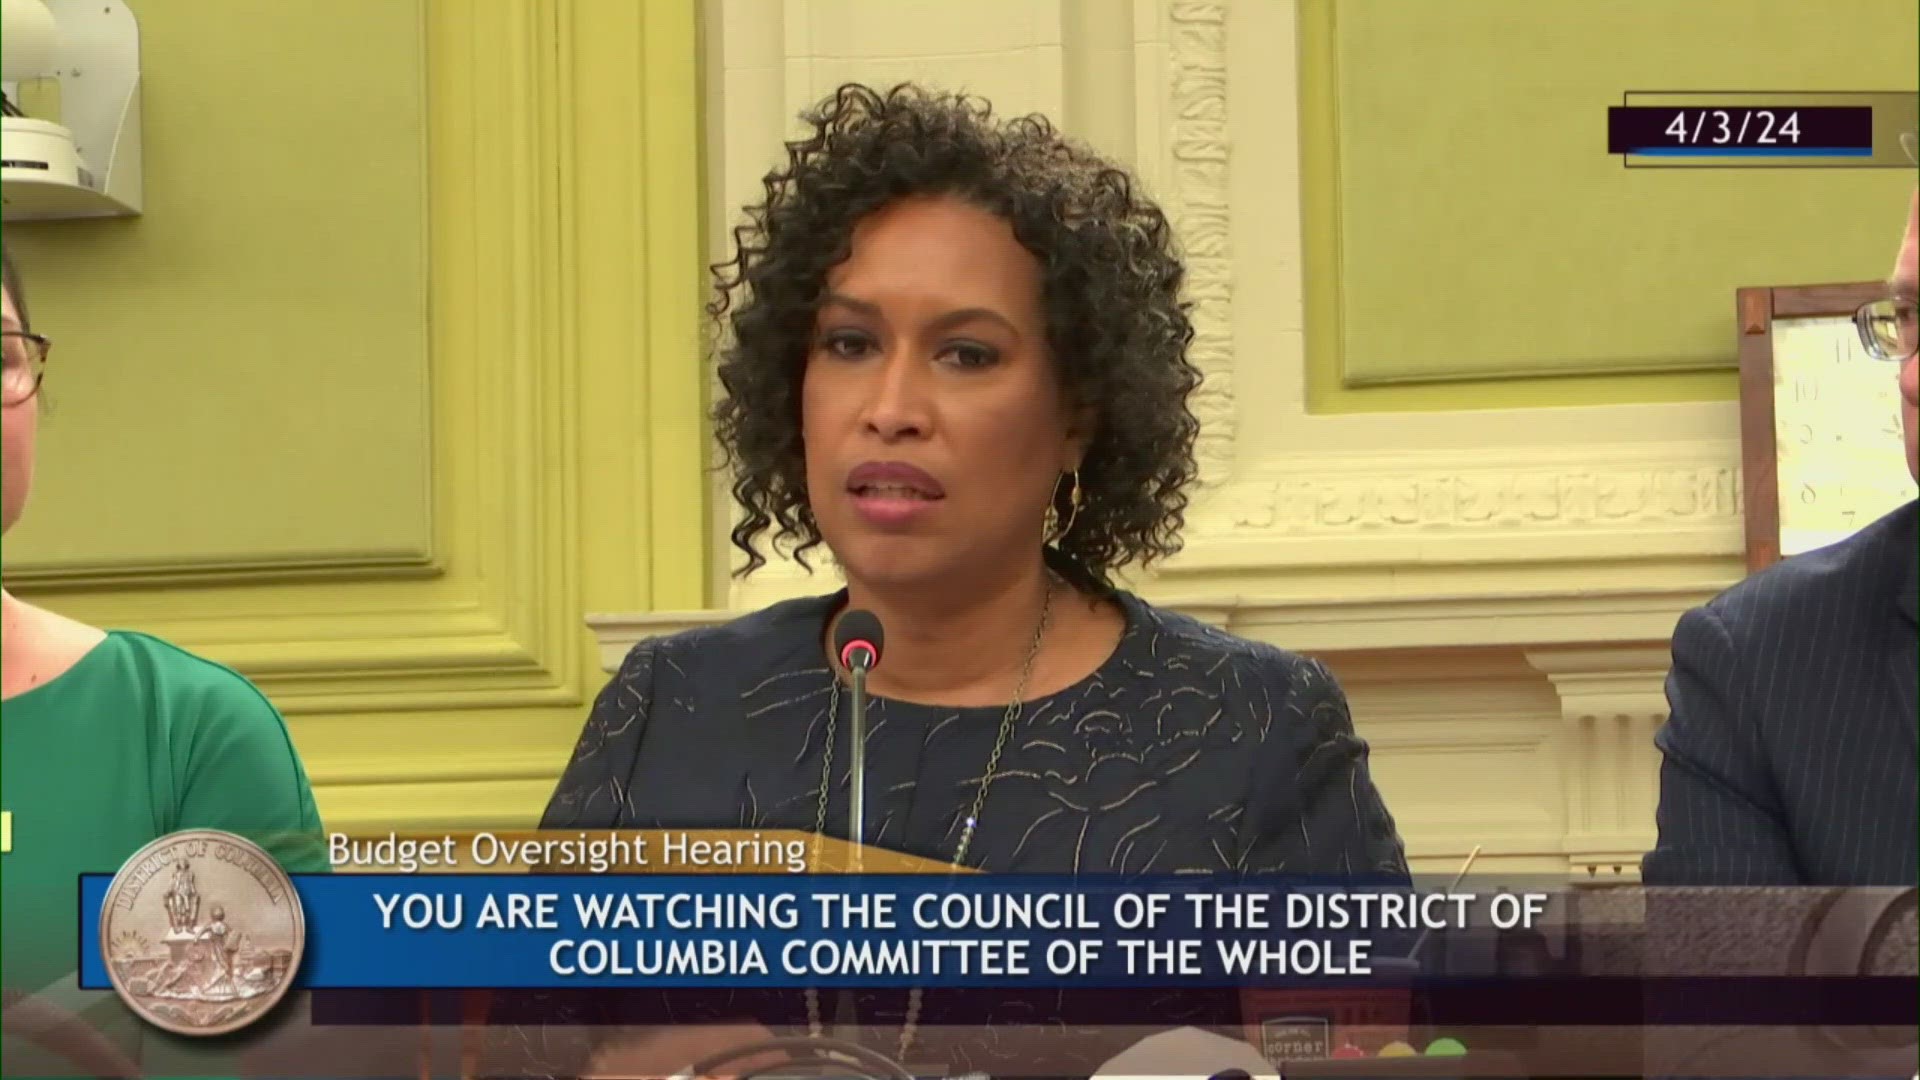 During the council hearing on the Mayor's proposed 2025 budget, Bowser called into question who is using the program intended for rental emergencies.